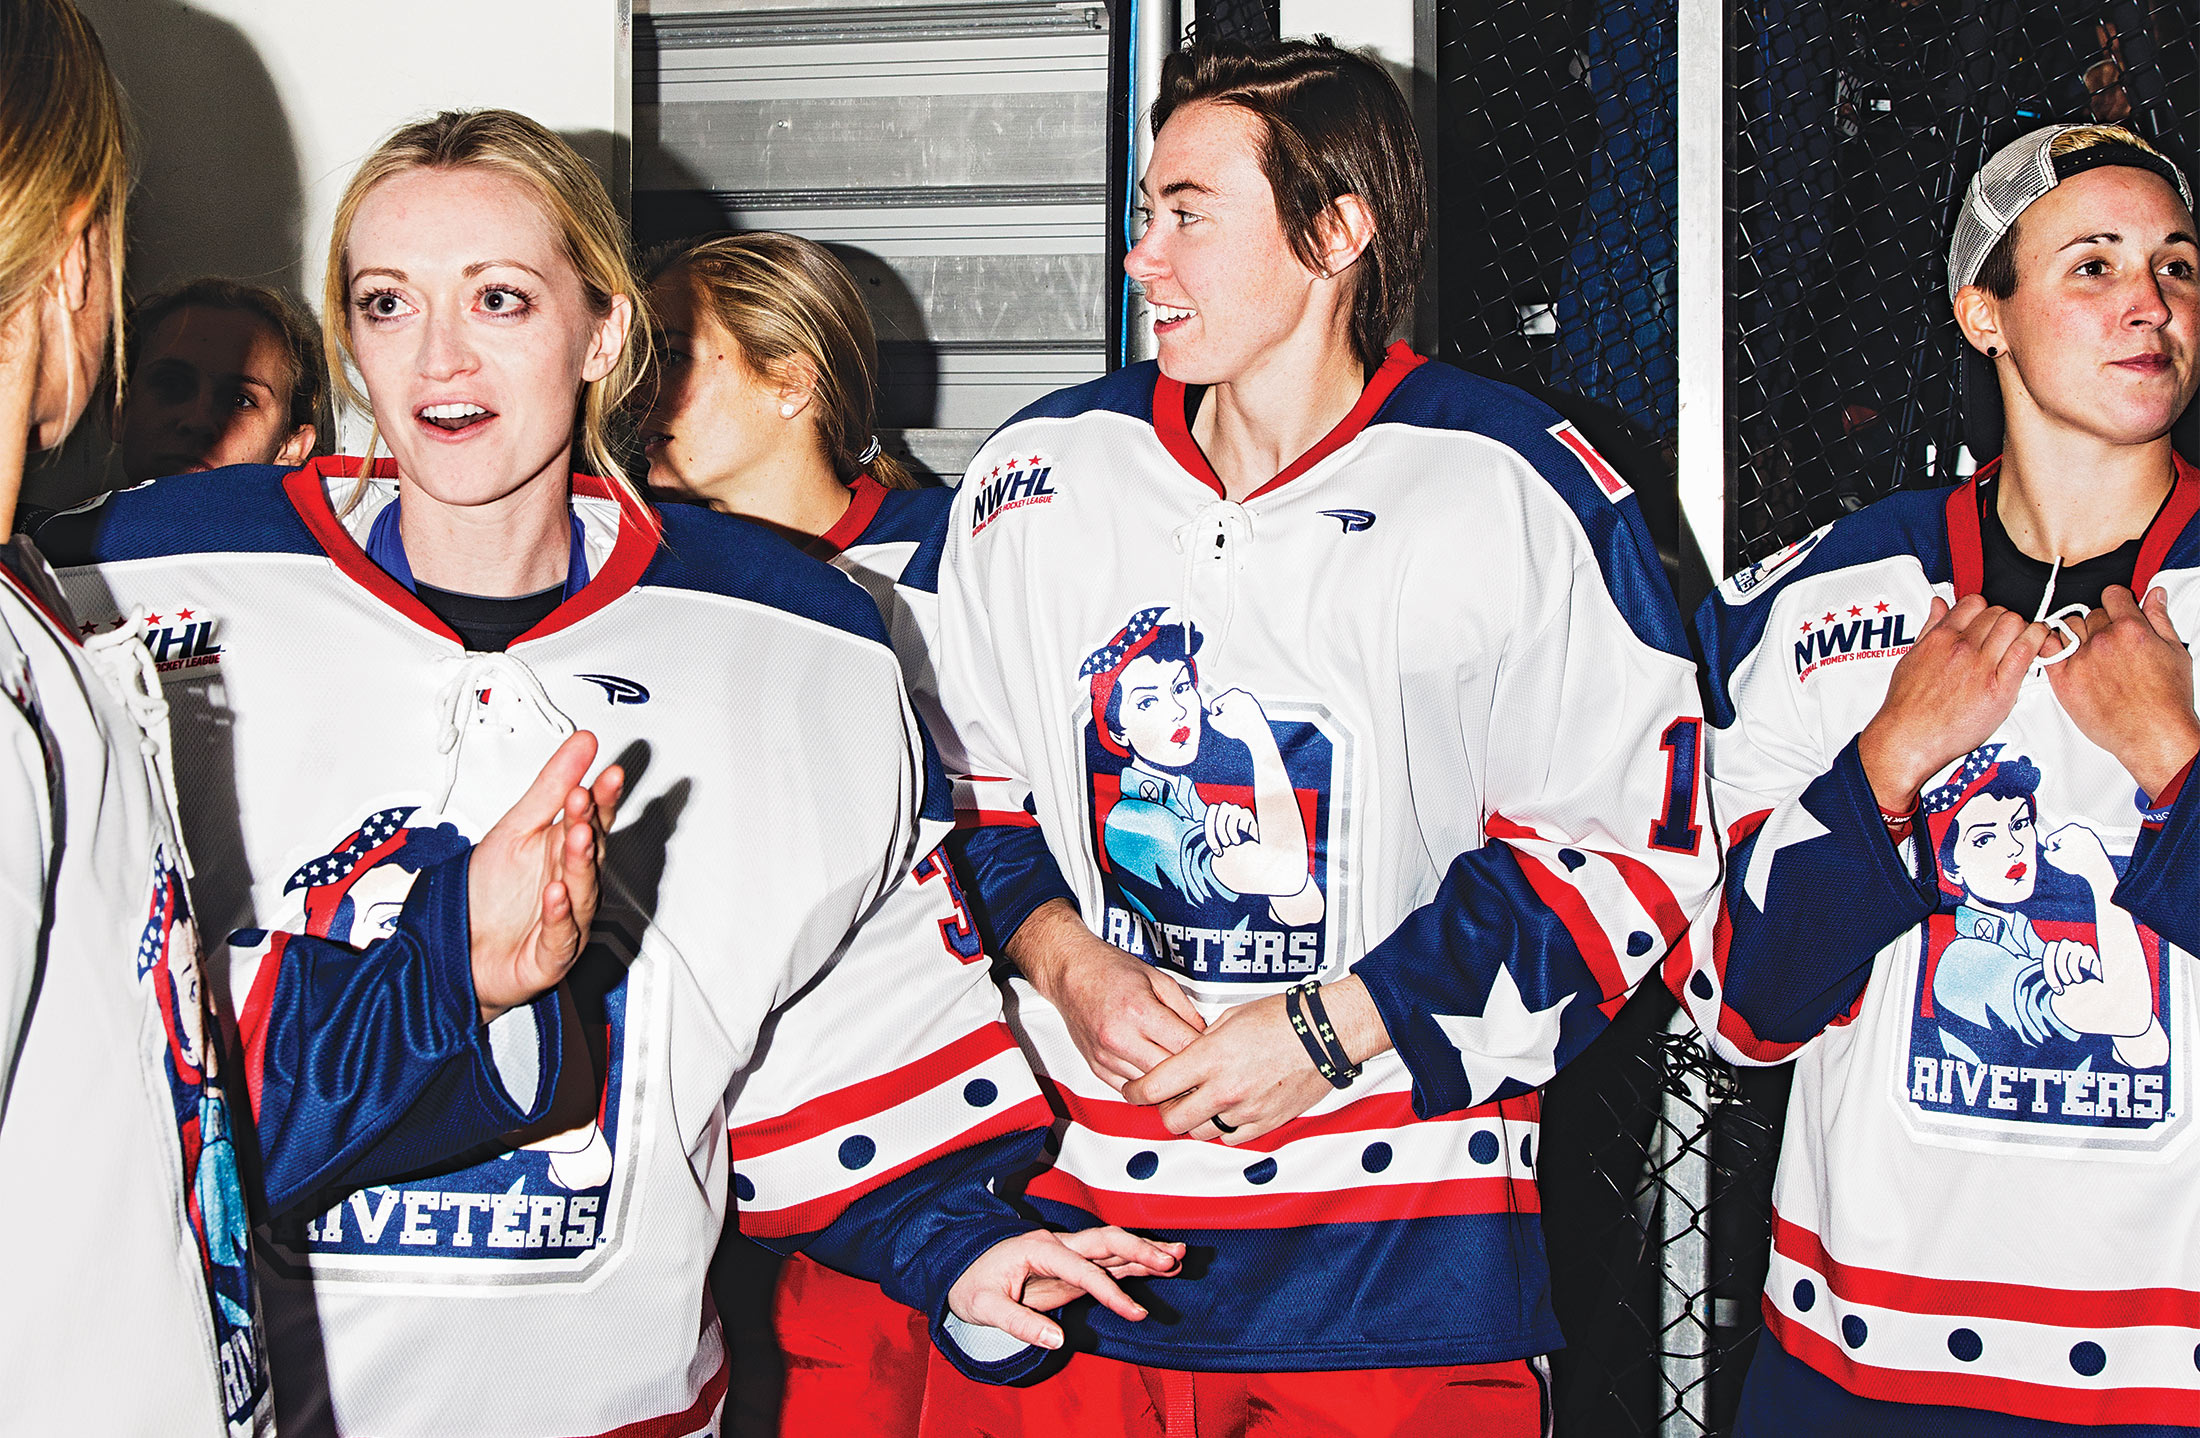 NWHL opens shop and reveals jerseys, portion of profit goes to players -  The Hockey News